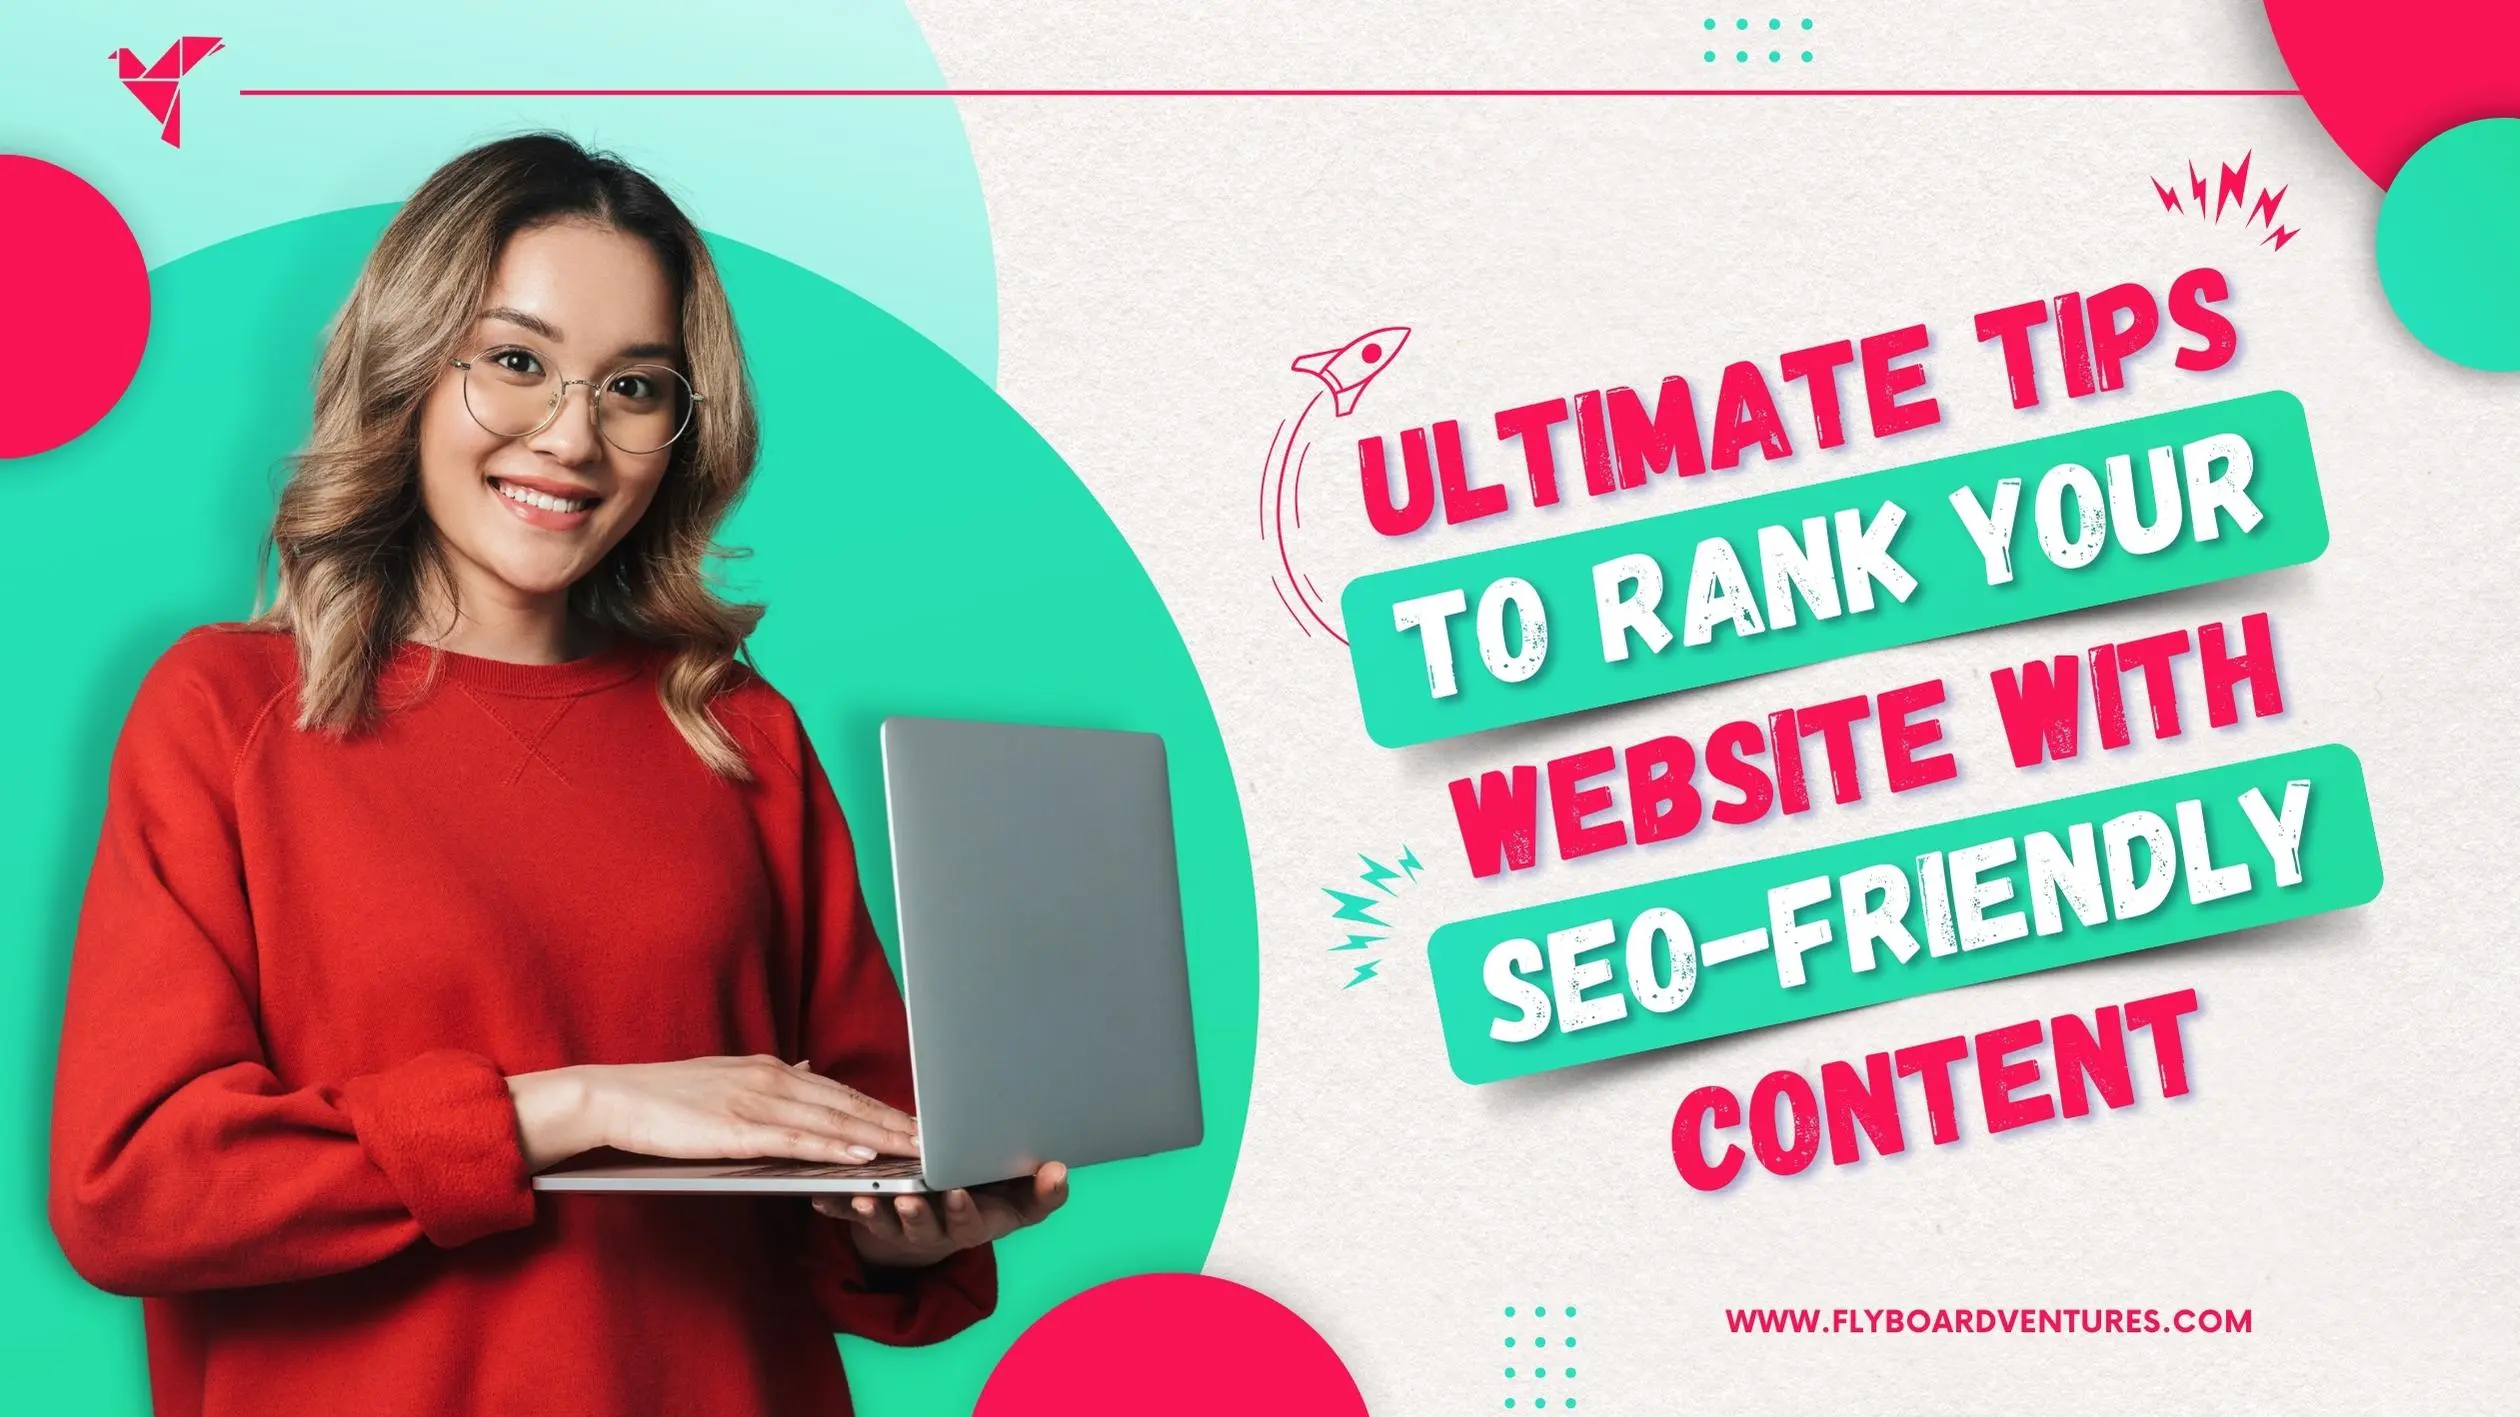 Ultimate Tips To Rank Your Website With SEO-Friendly Content